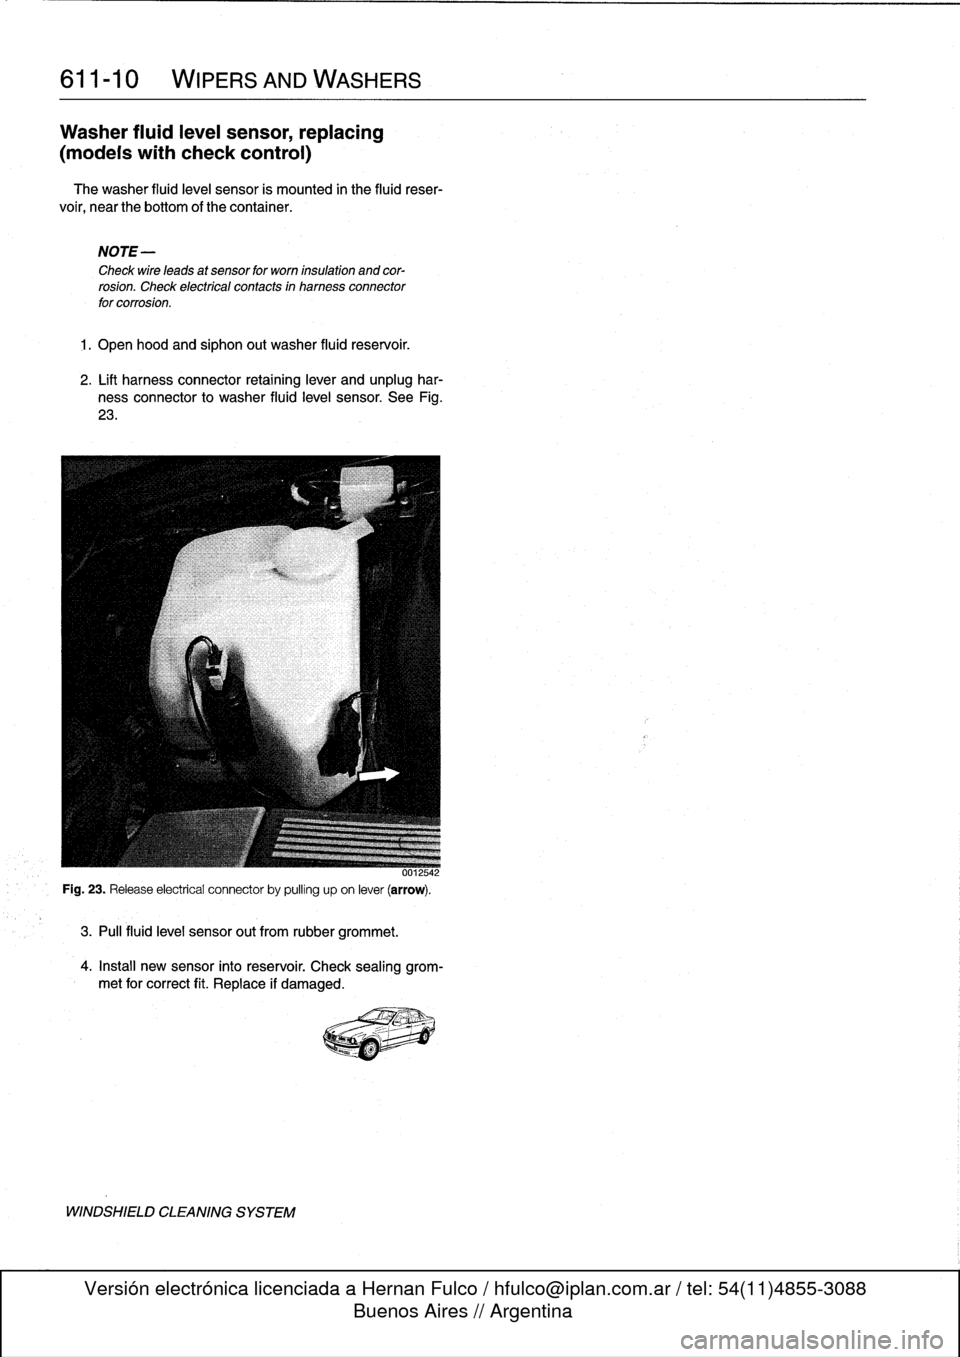 BMW 318i 1997 E36 Workshop Manual 
611-
1
0

	

WIPERS
AND
WASHERS

Washer
fluidleve¡
sensor,
replacing

(modeis
with
check
control)

The
washer
fluid
level
sensor
is
mounted
in
the
fluid
reser-

voir,
near
the
bottom
of
thecontainer